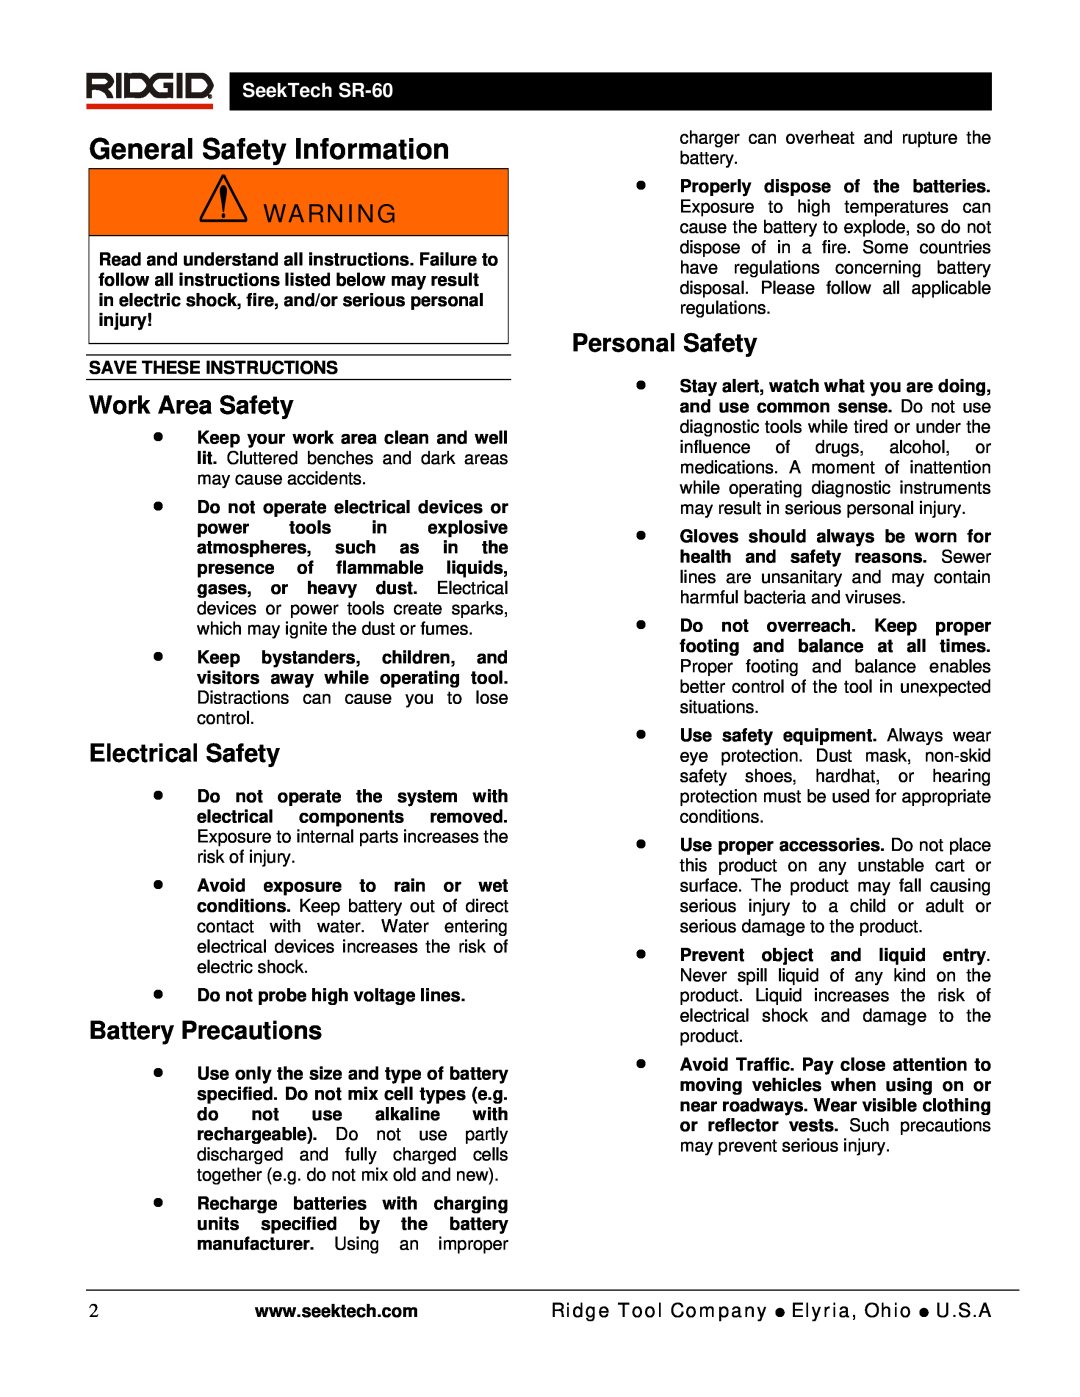 RIDGID SR-60 manual General Safety Information, Work Area Safety, Electrical Safety, Battery Precautions, Personal Safety 